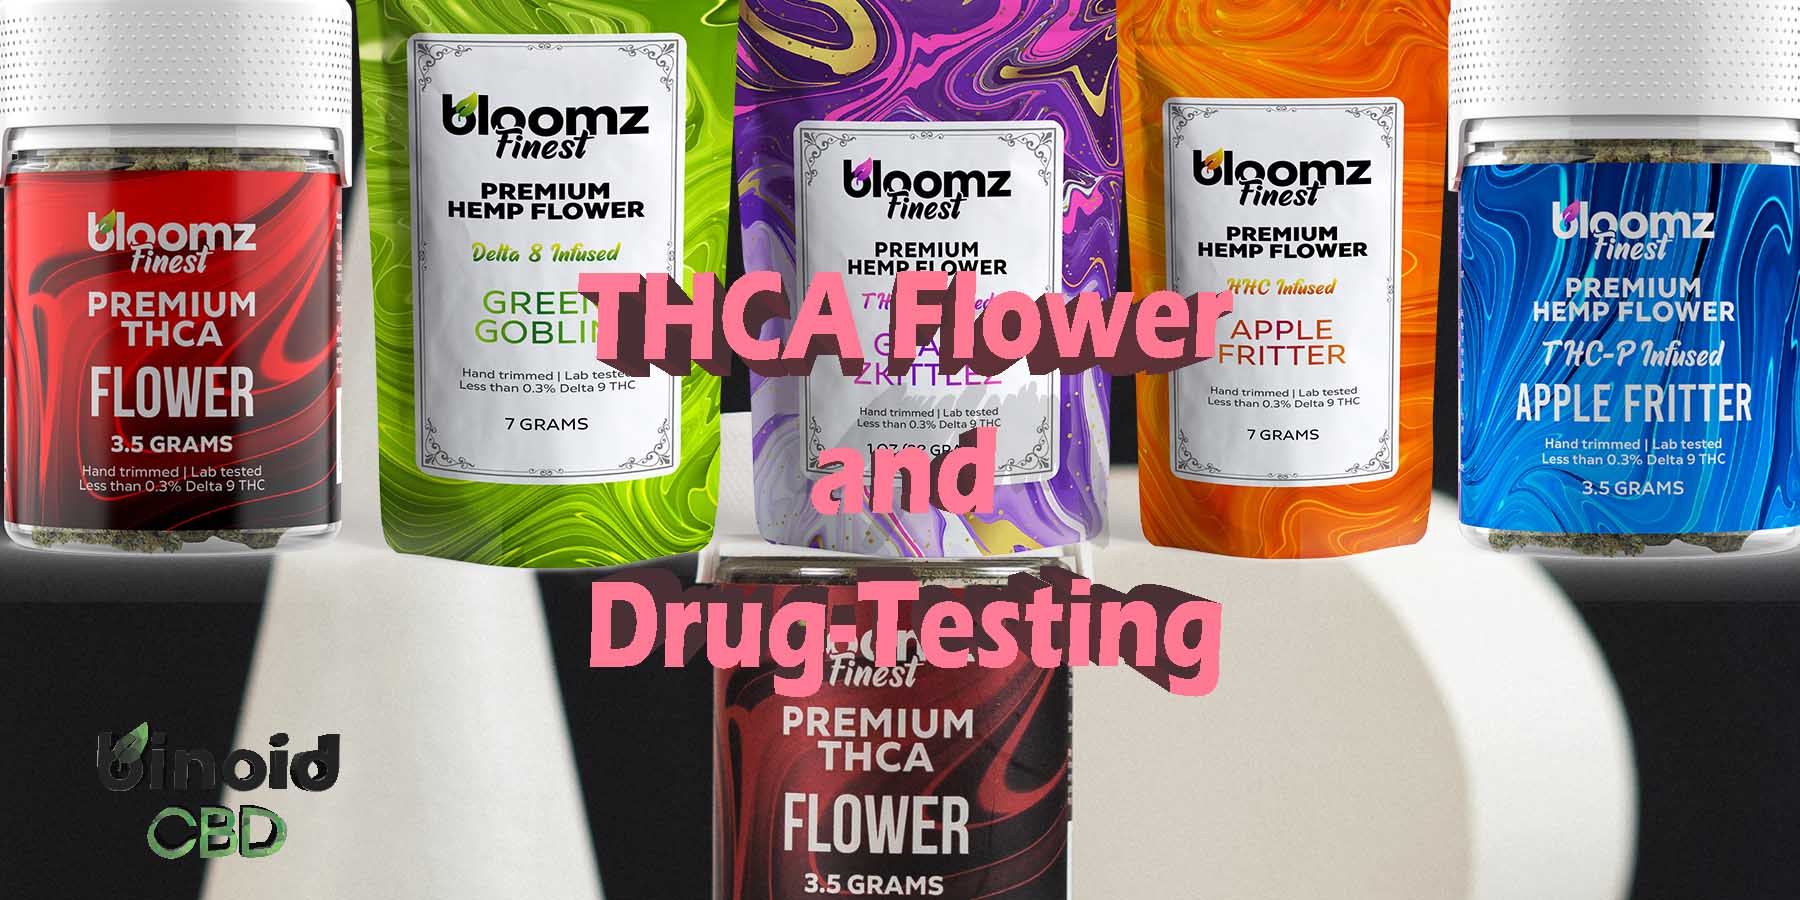 THCA Flower and Drug Testing Best Place To Buy THCA Flower Online How To Buy Delta 8 Flower Online Pre Rolls Where To Get Near Me Best Place Lowest Price Coupon Discount Strongest Brand Bloomz